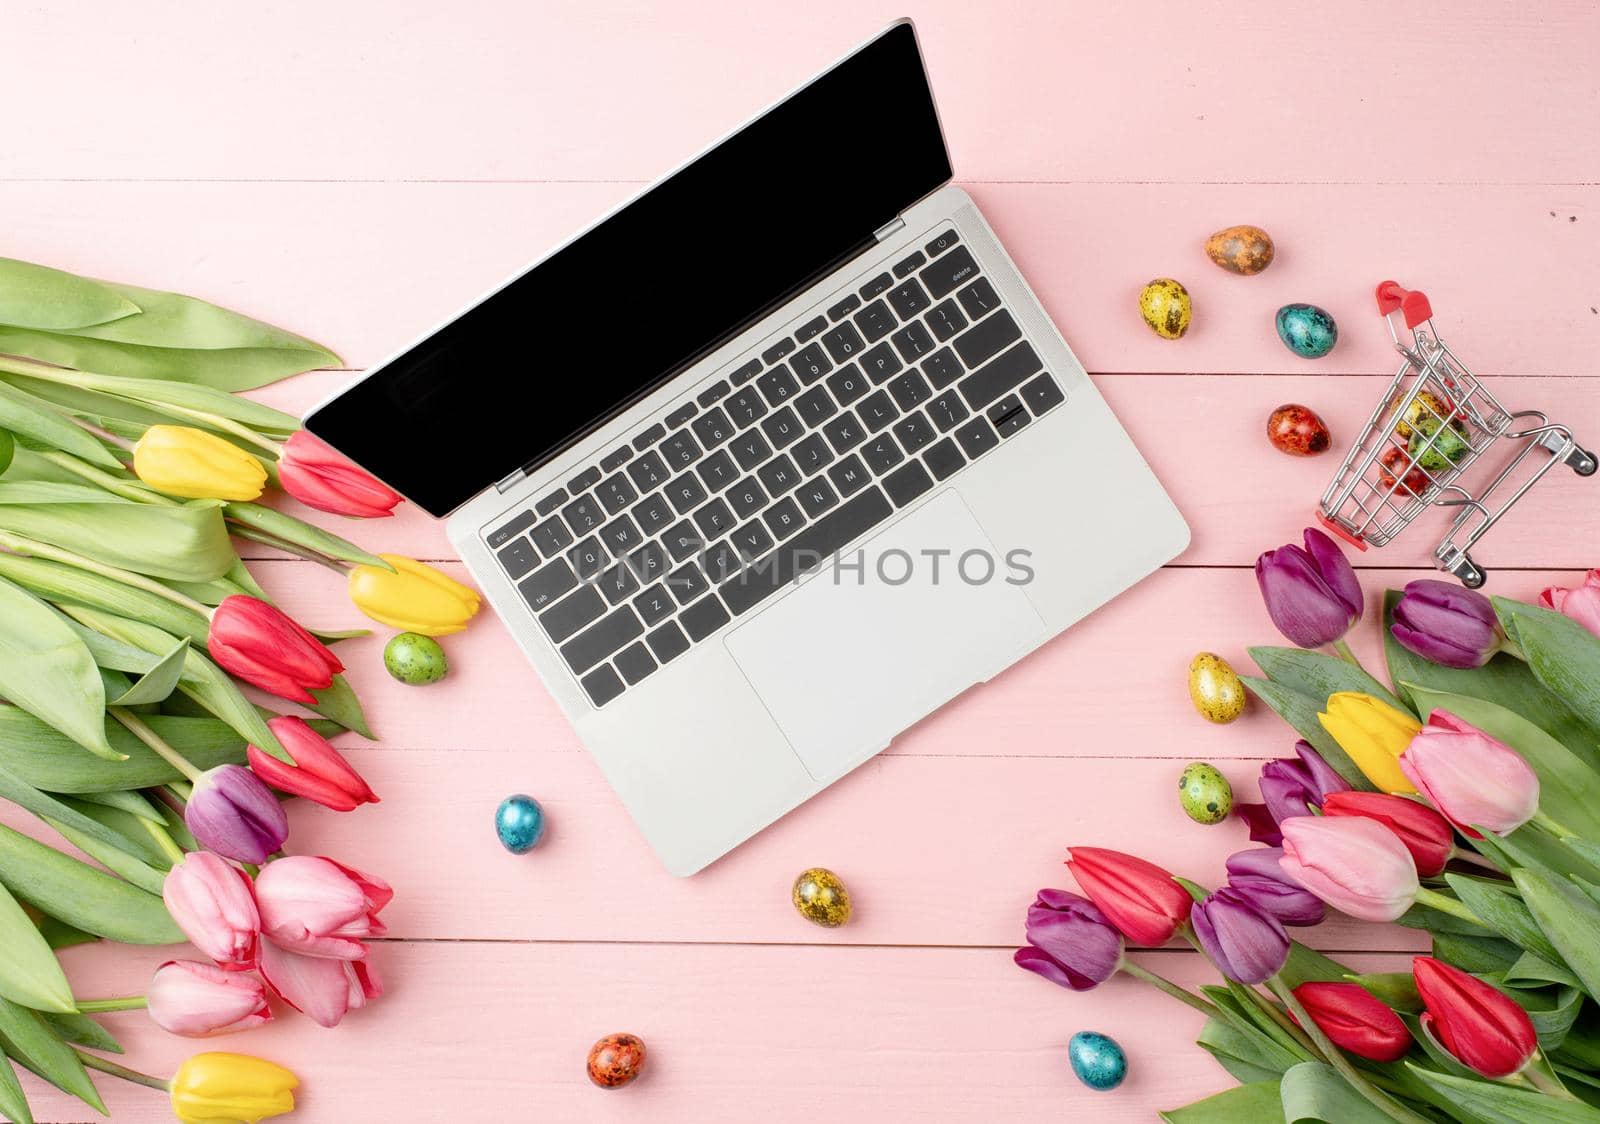 Easter and spring concept. Top view of laptop computer, colorful tulips and Easter eggs on pink wooden background